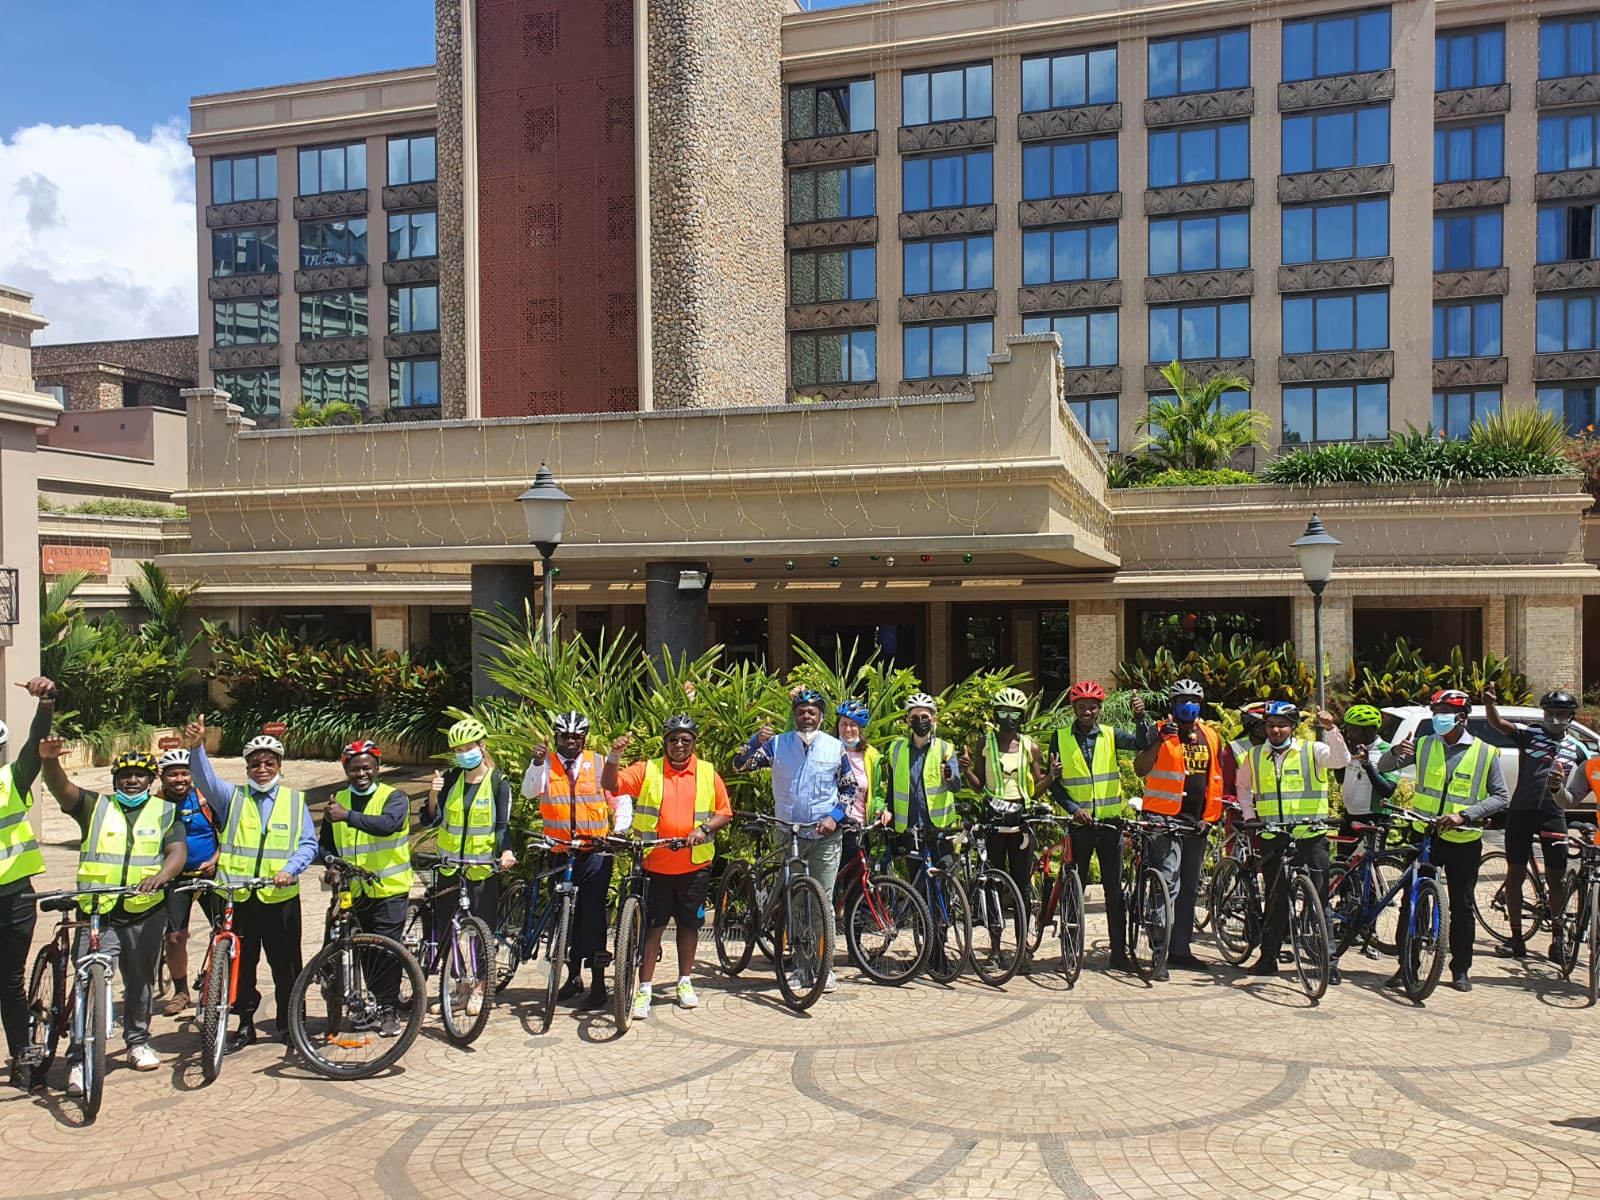 Participants arrived safely at the Workhop venue after 8 kms of cycling